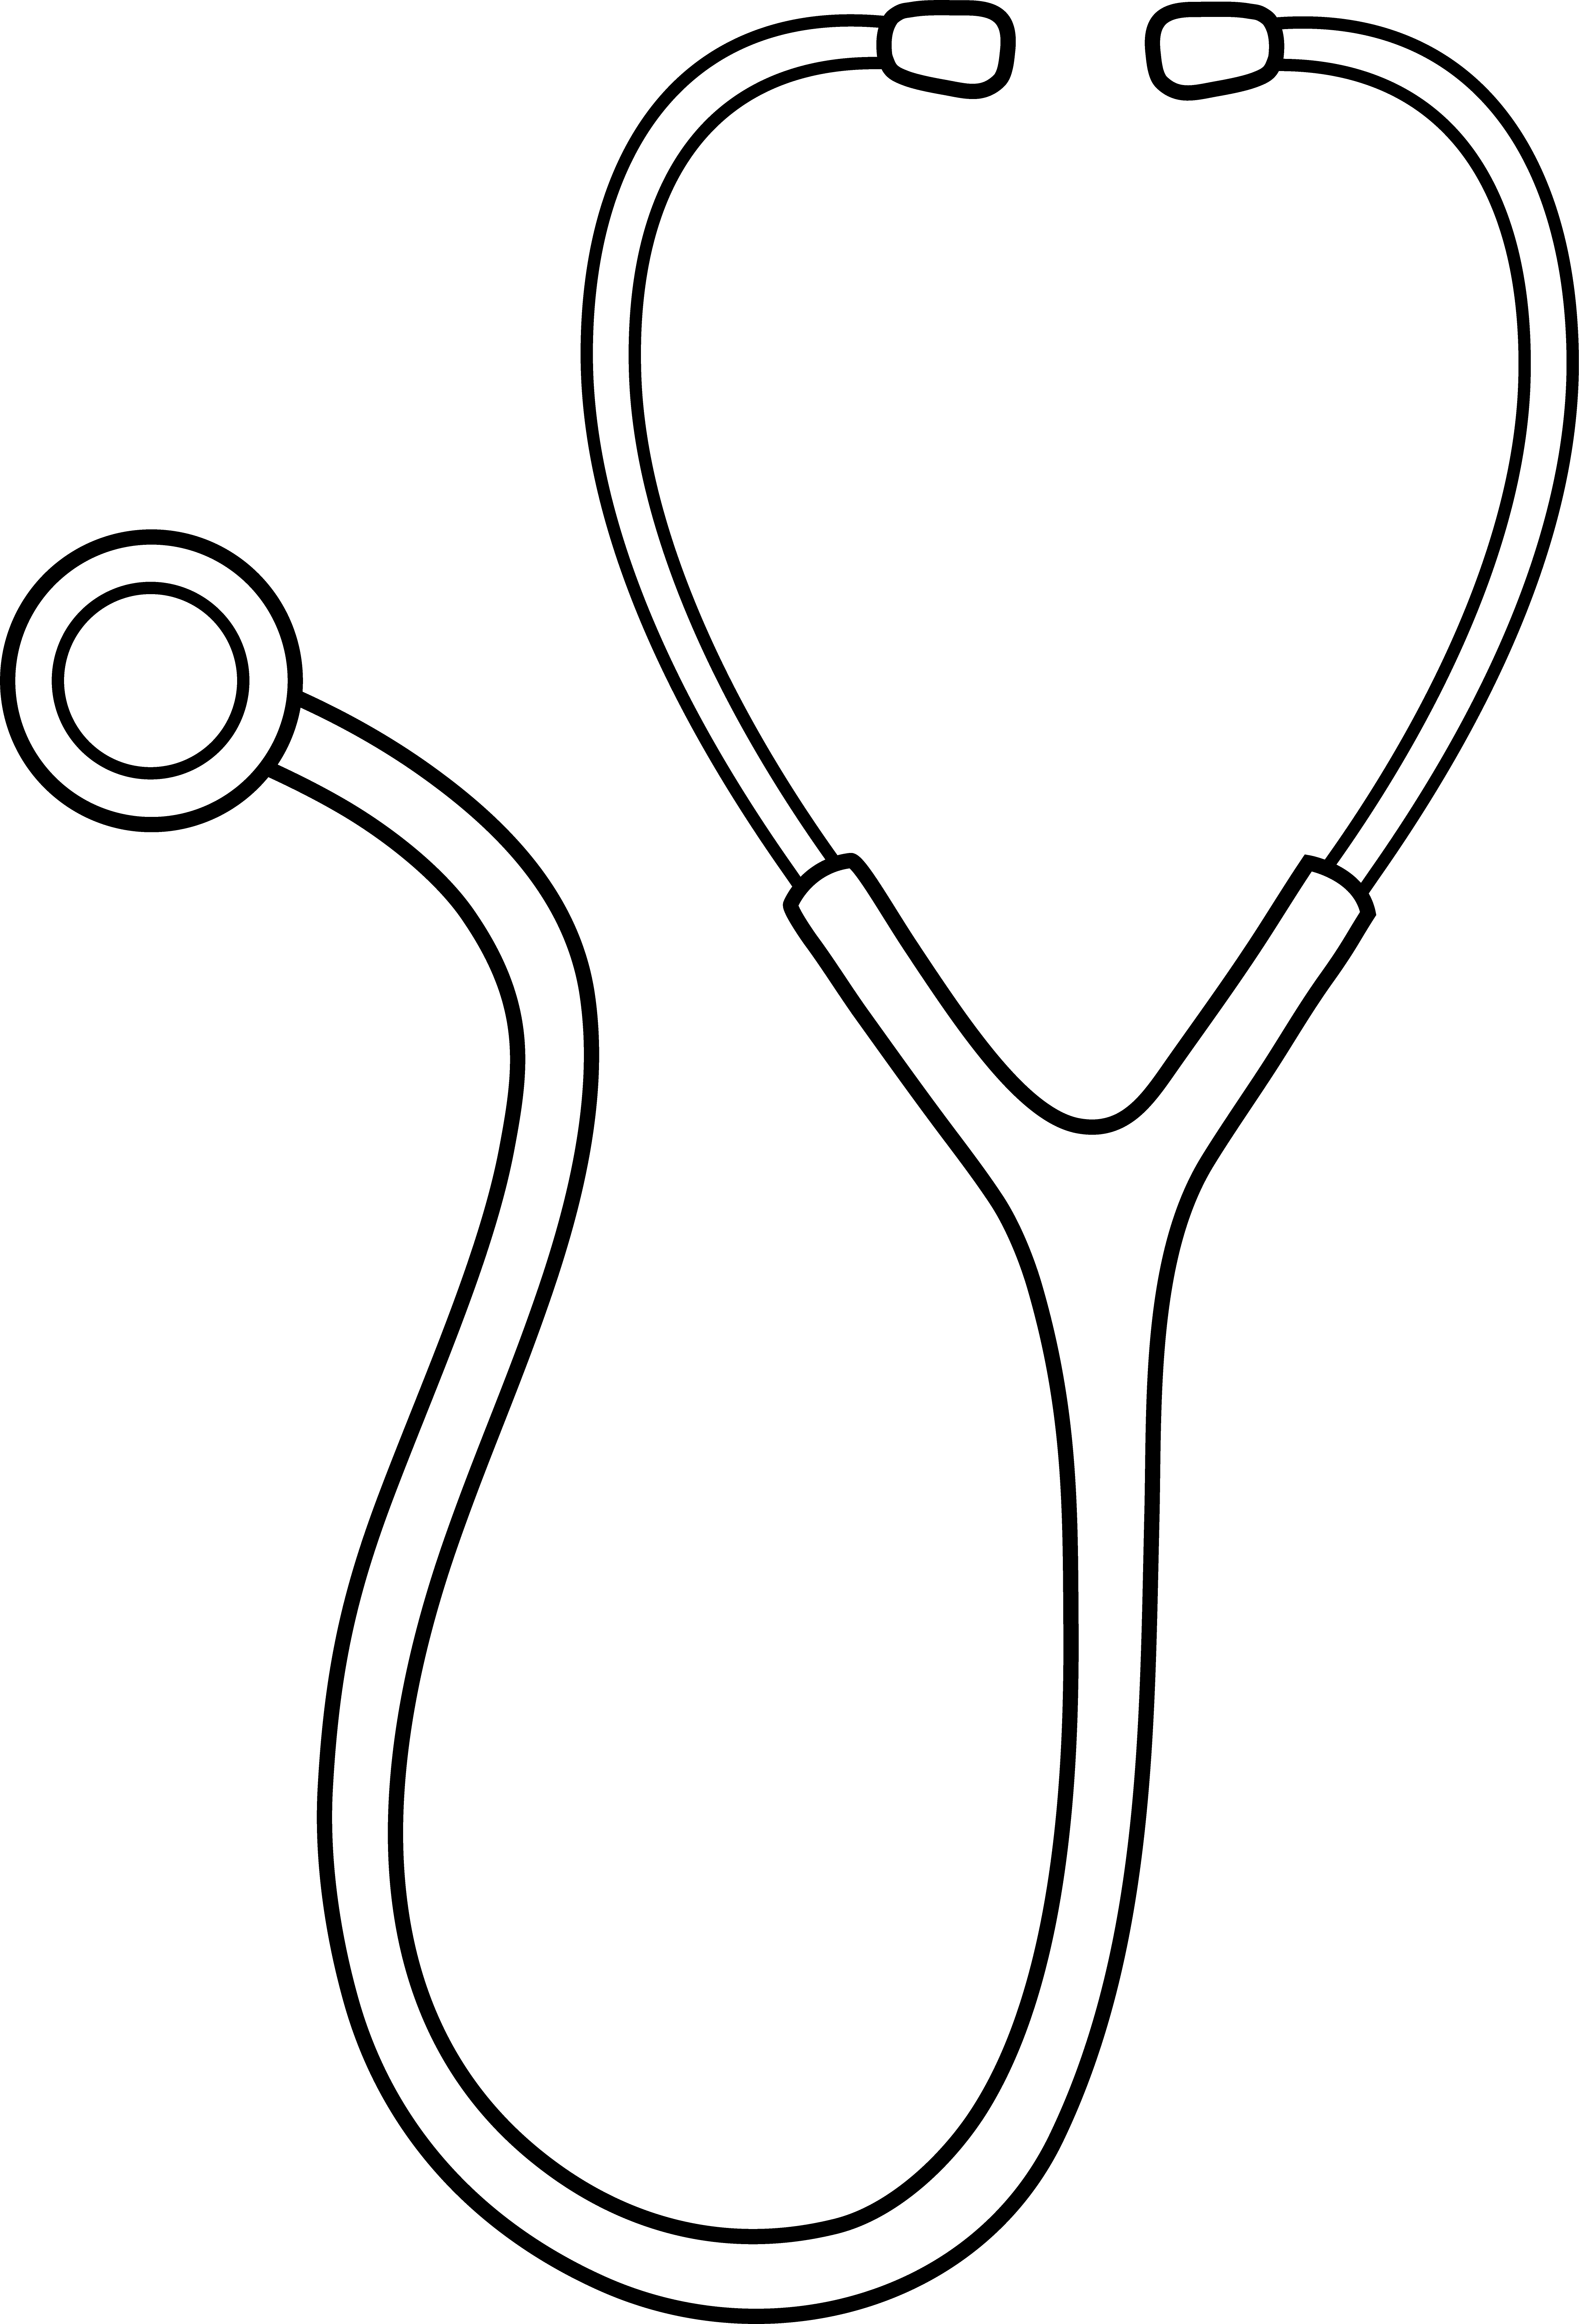 Black and White Stethoscope - Free Clip Art